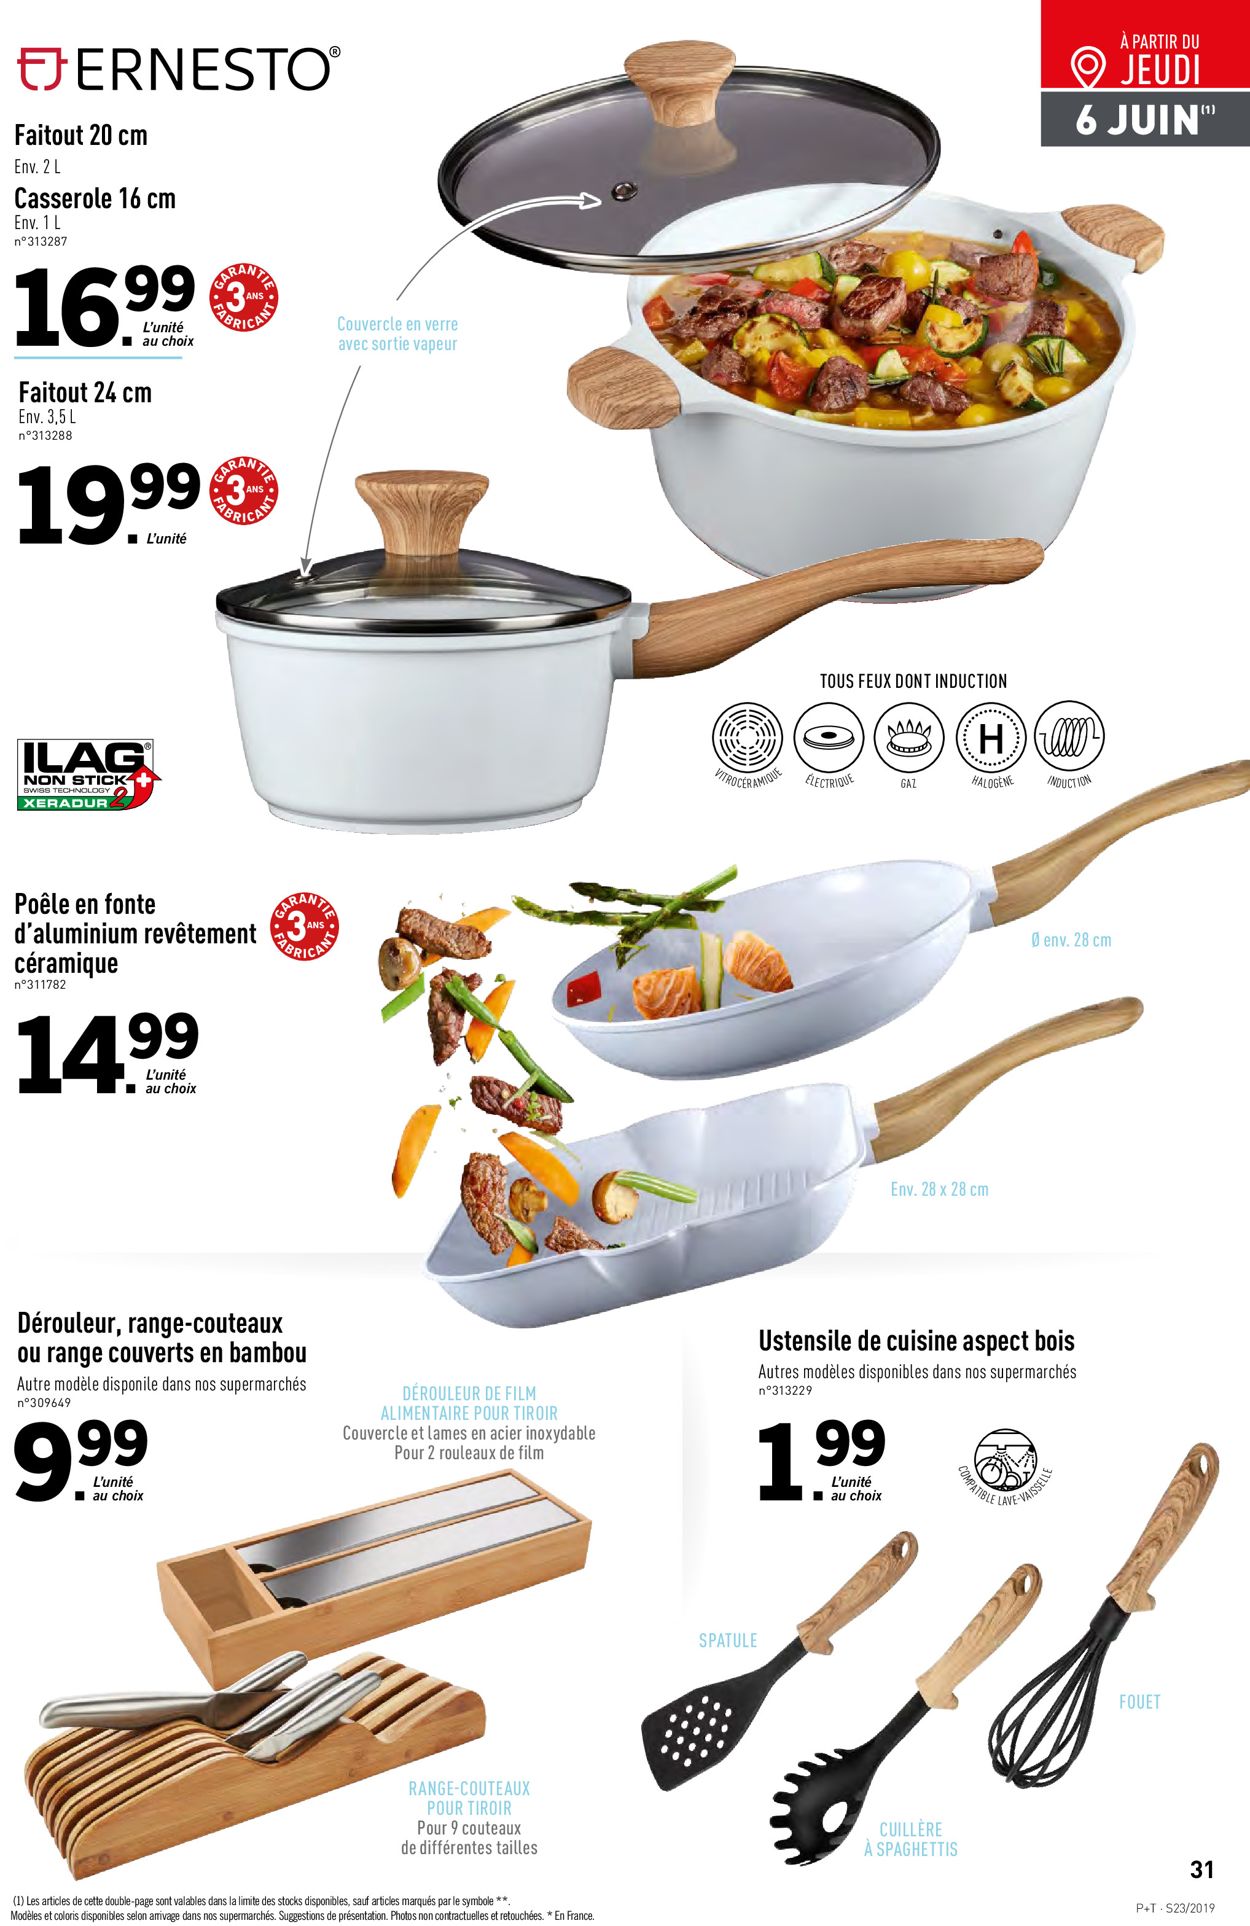 Lidl Catalogue - 05.06-11.06.2019 (Page 31)